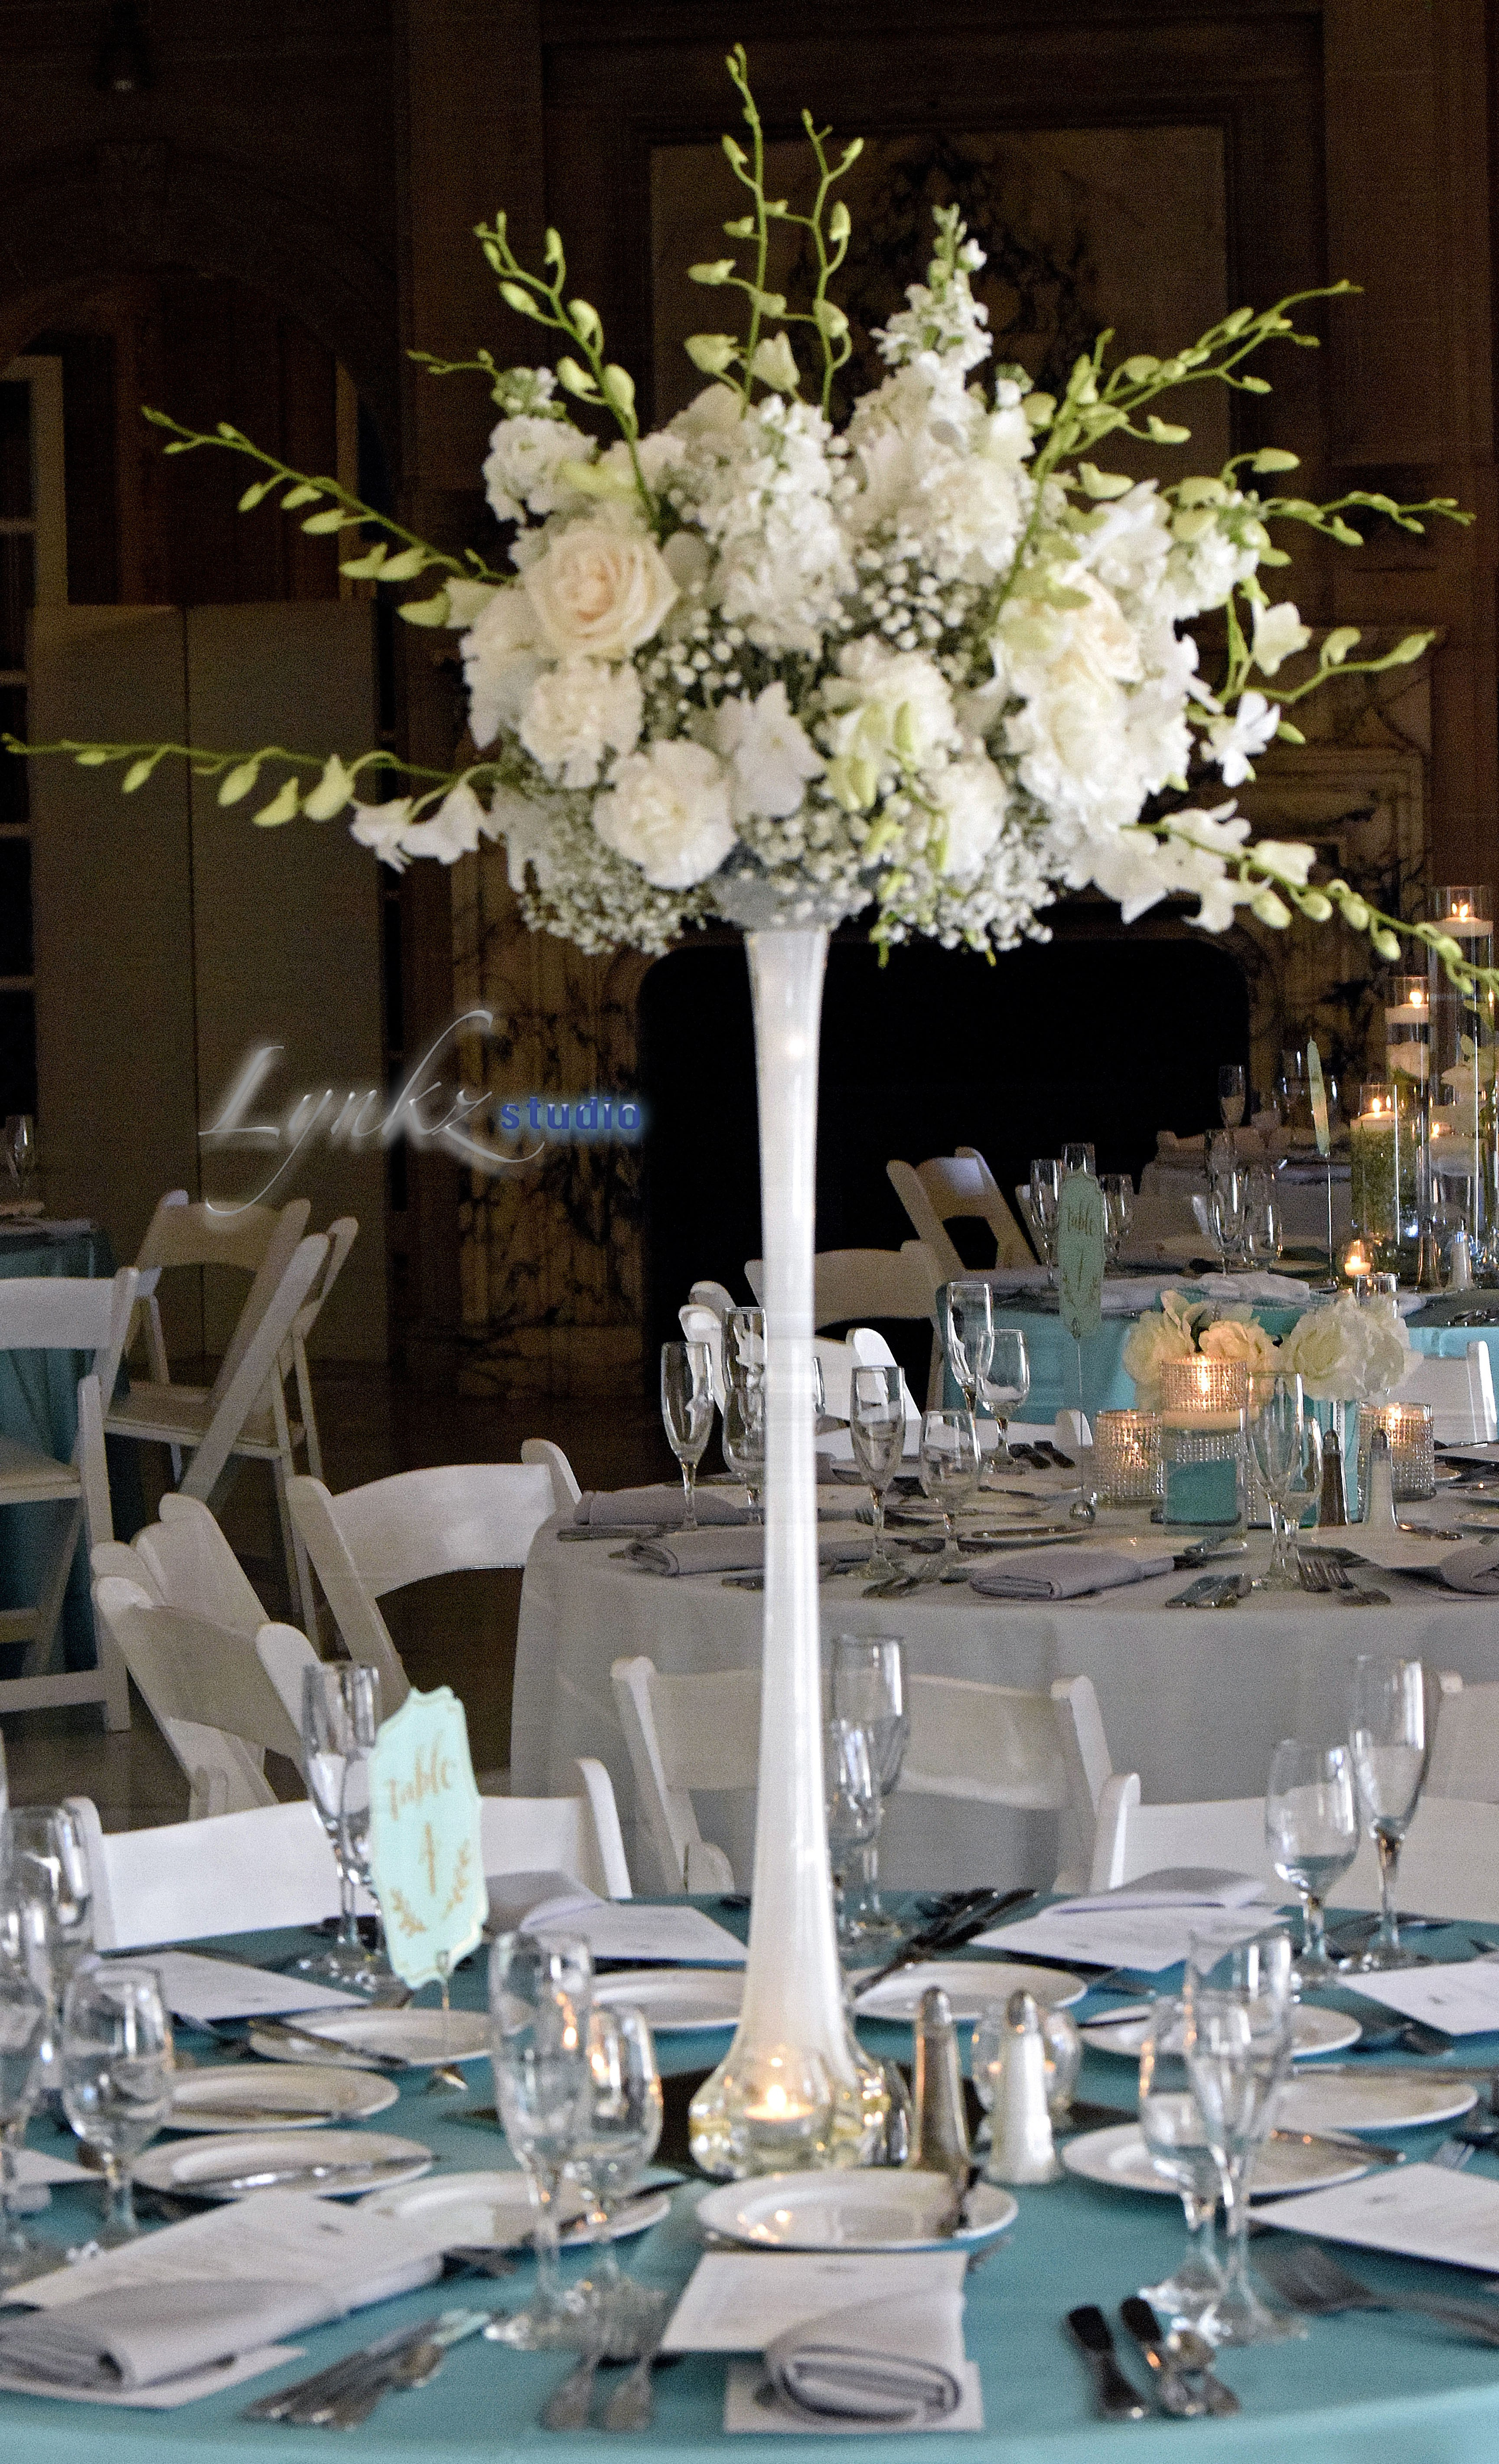 10 Ideal Tall Vases for Wedding Reception Centerpieces 2024 free download tall vases for wedding reception centerpieces of decorating ideas for tall vases luxury guest table centerpiece on pertaining to decorating ideas for tall vases luxury guest table centerpiec